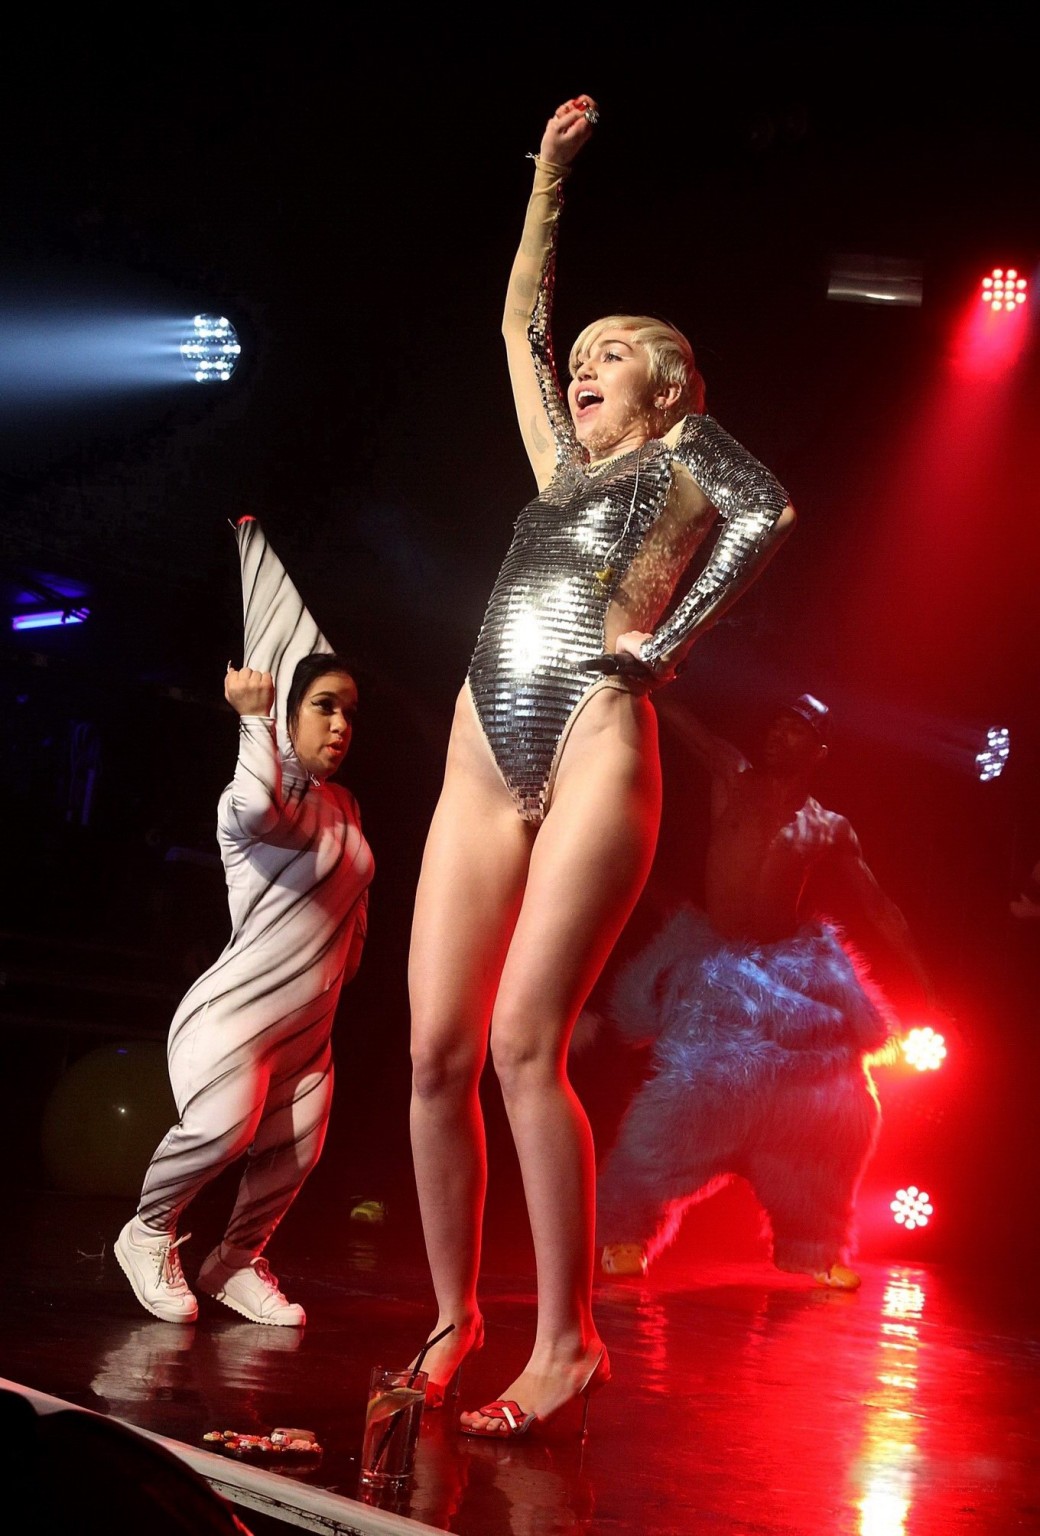 Miley Cyrus giving a blowjob to a blow up doll on stage at GAY Club in London #75197078